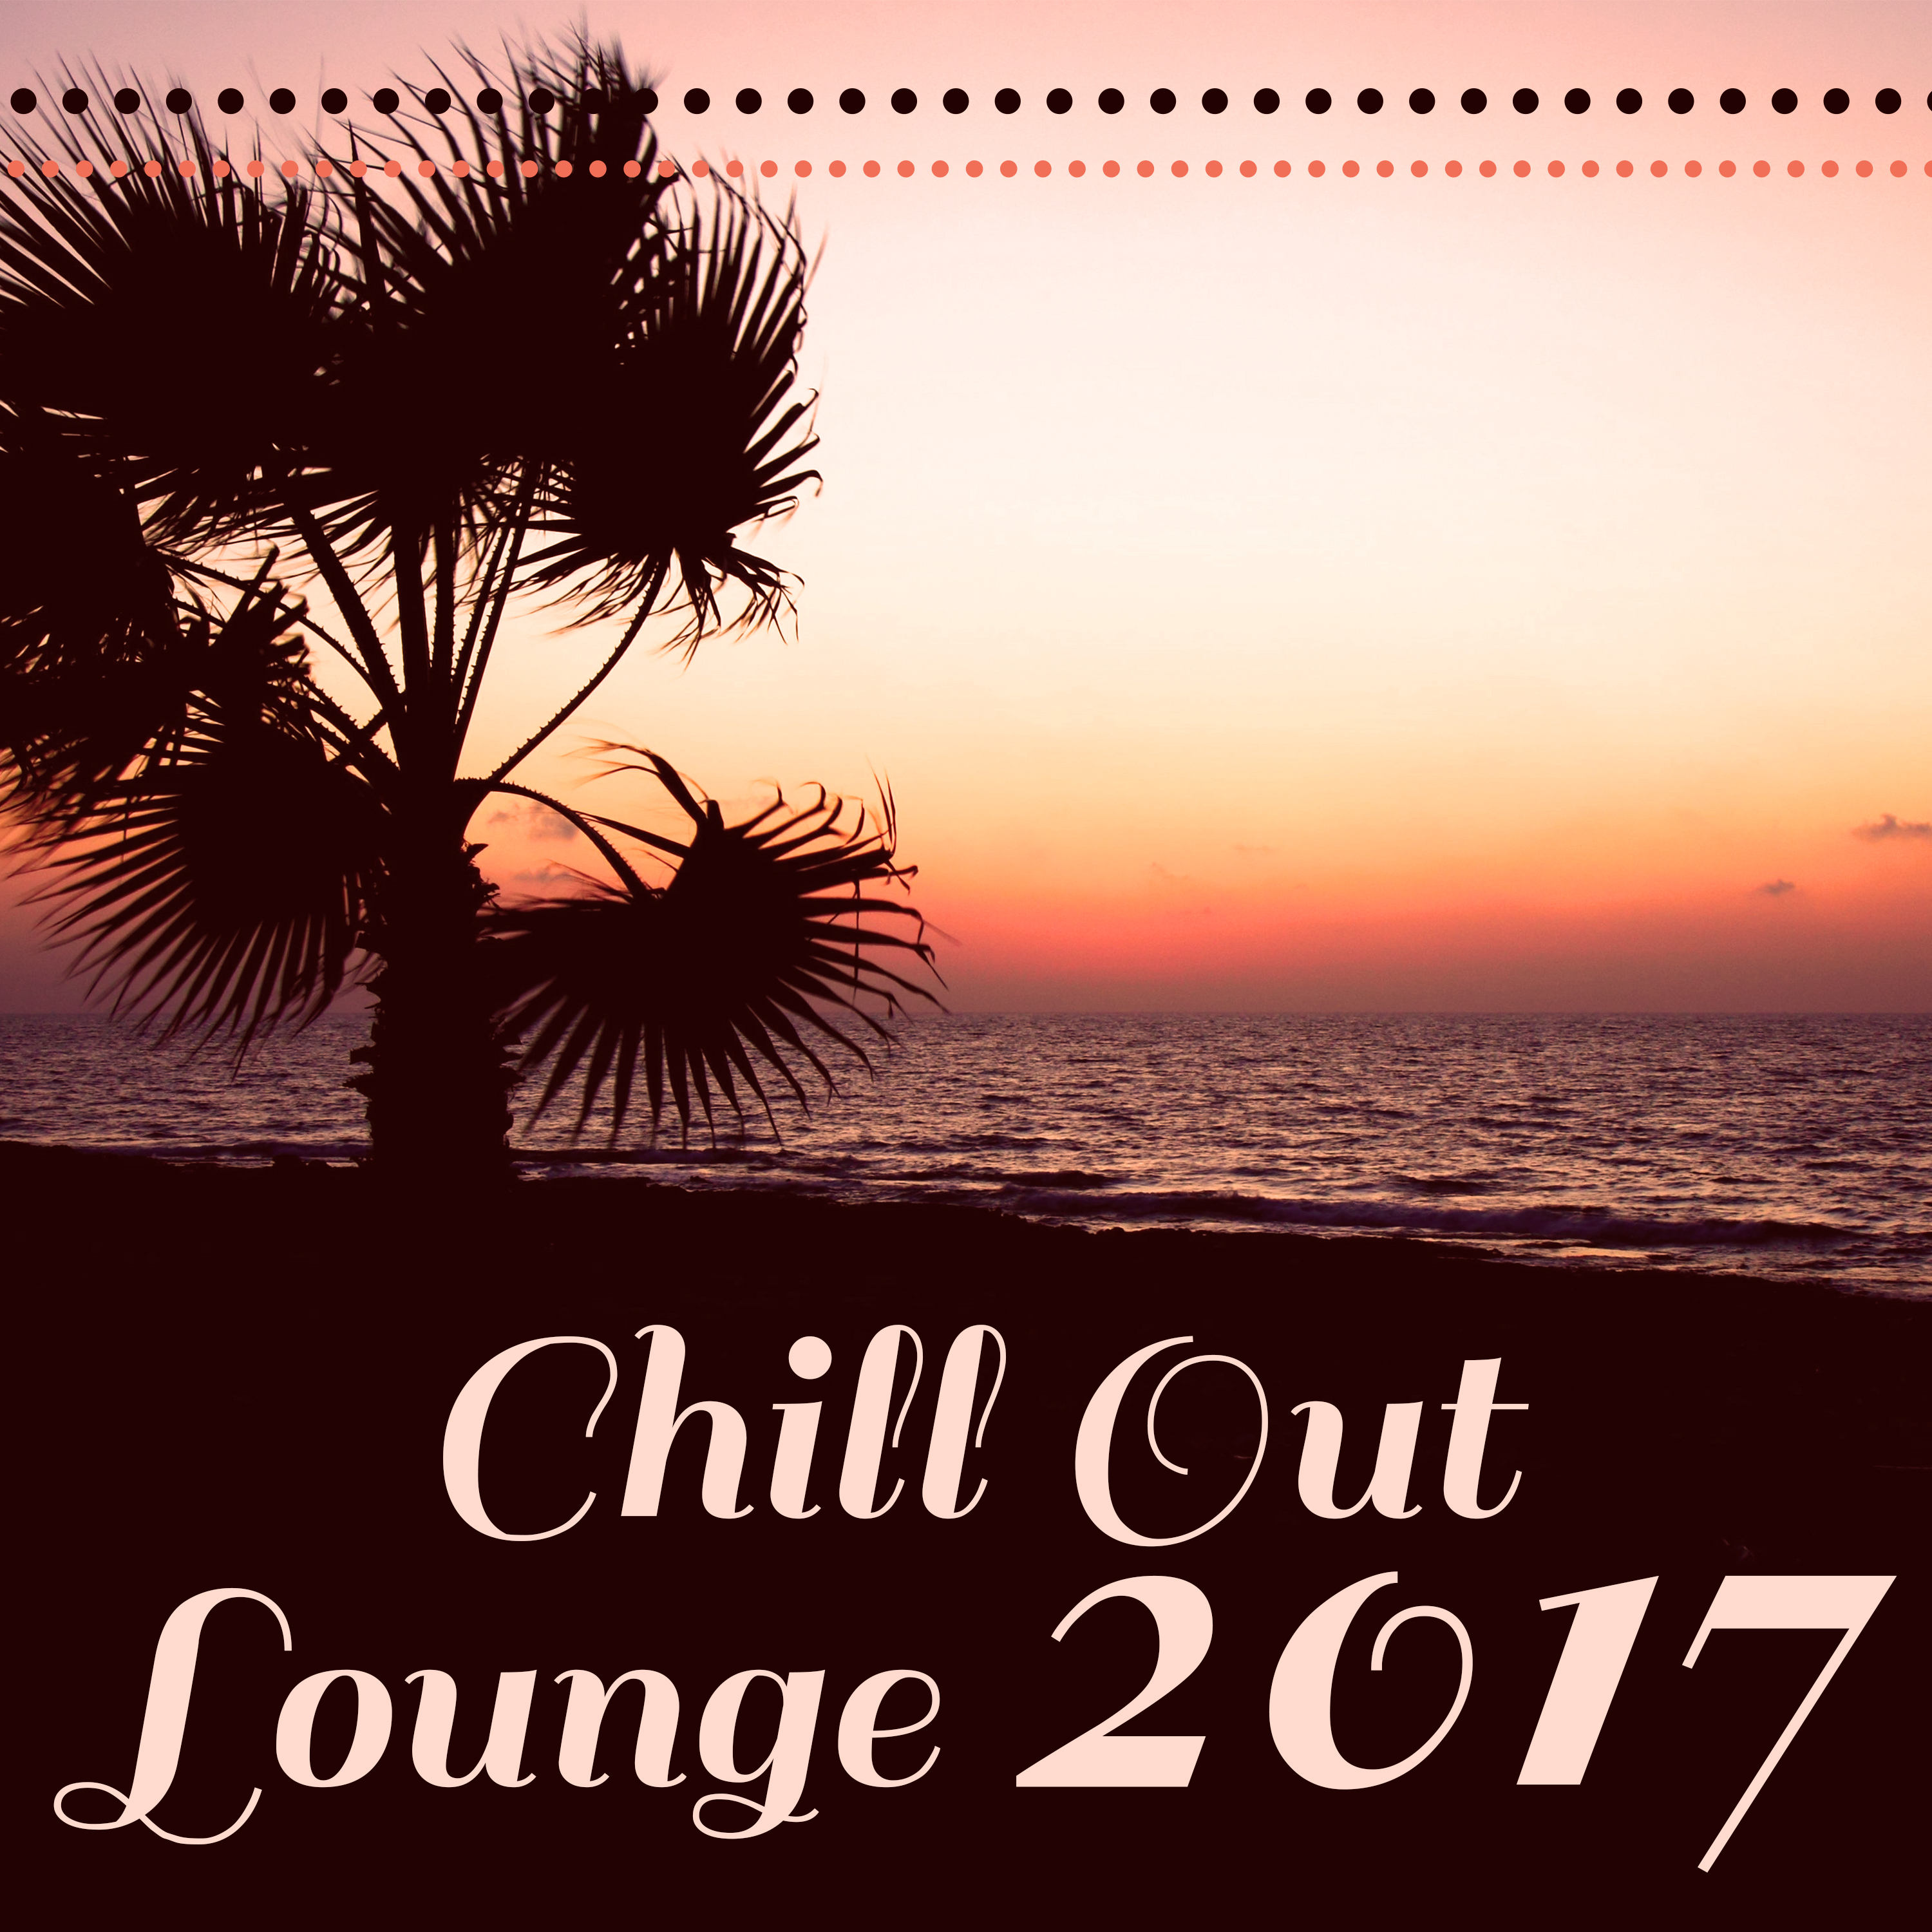 Chill Out Lounge 2017 – Spring Vibes of Chill Out, Chillout Session, Relax, Party Music